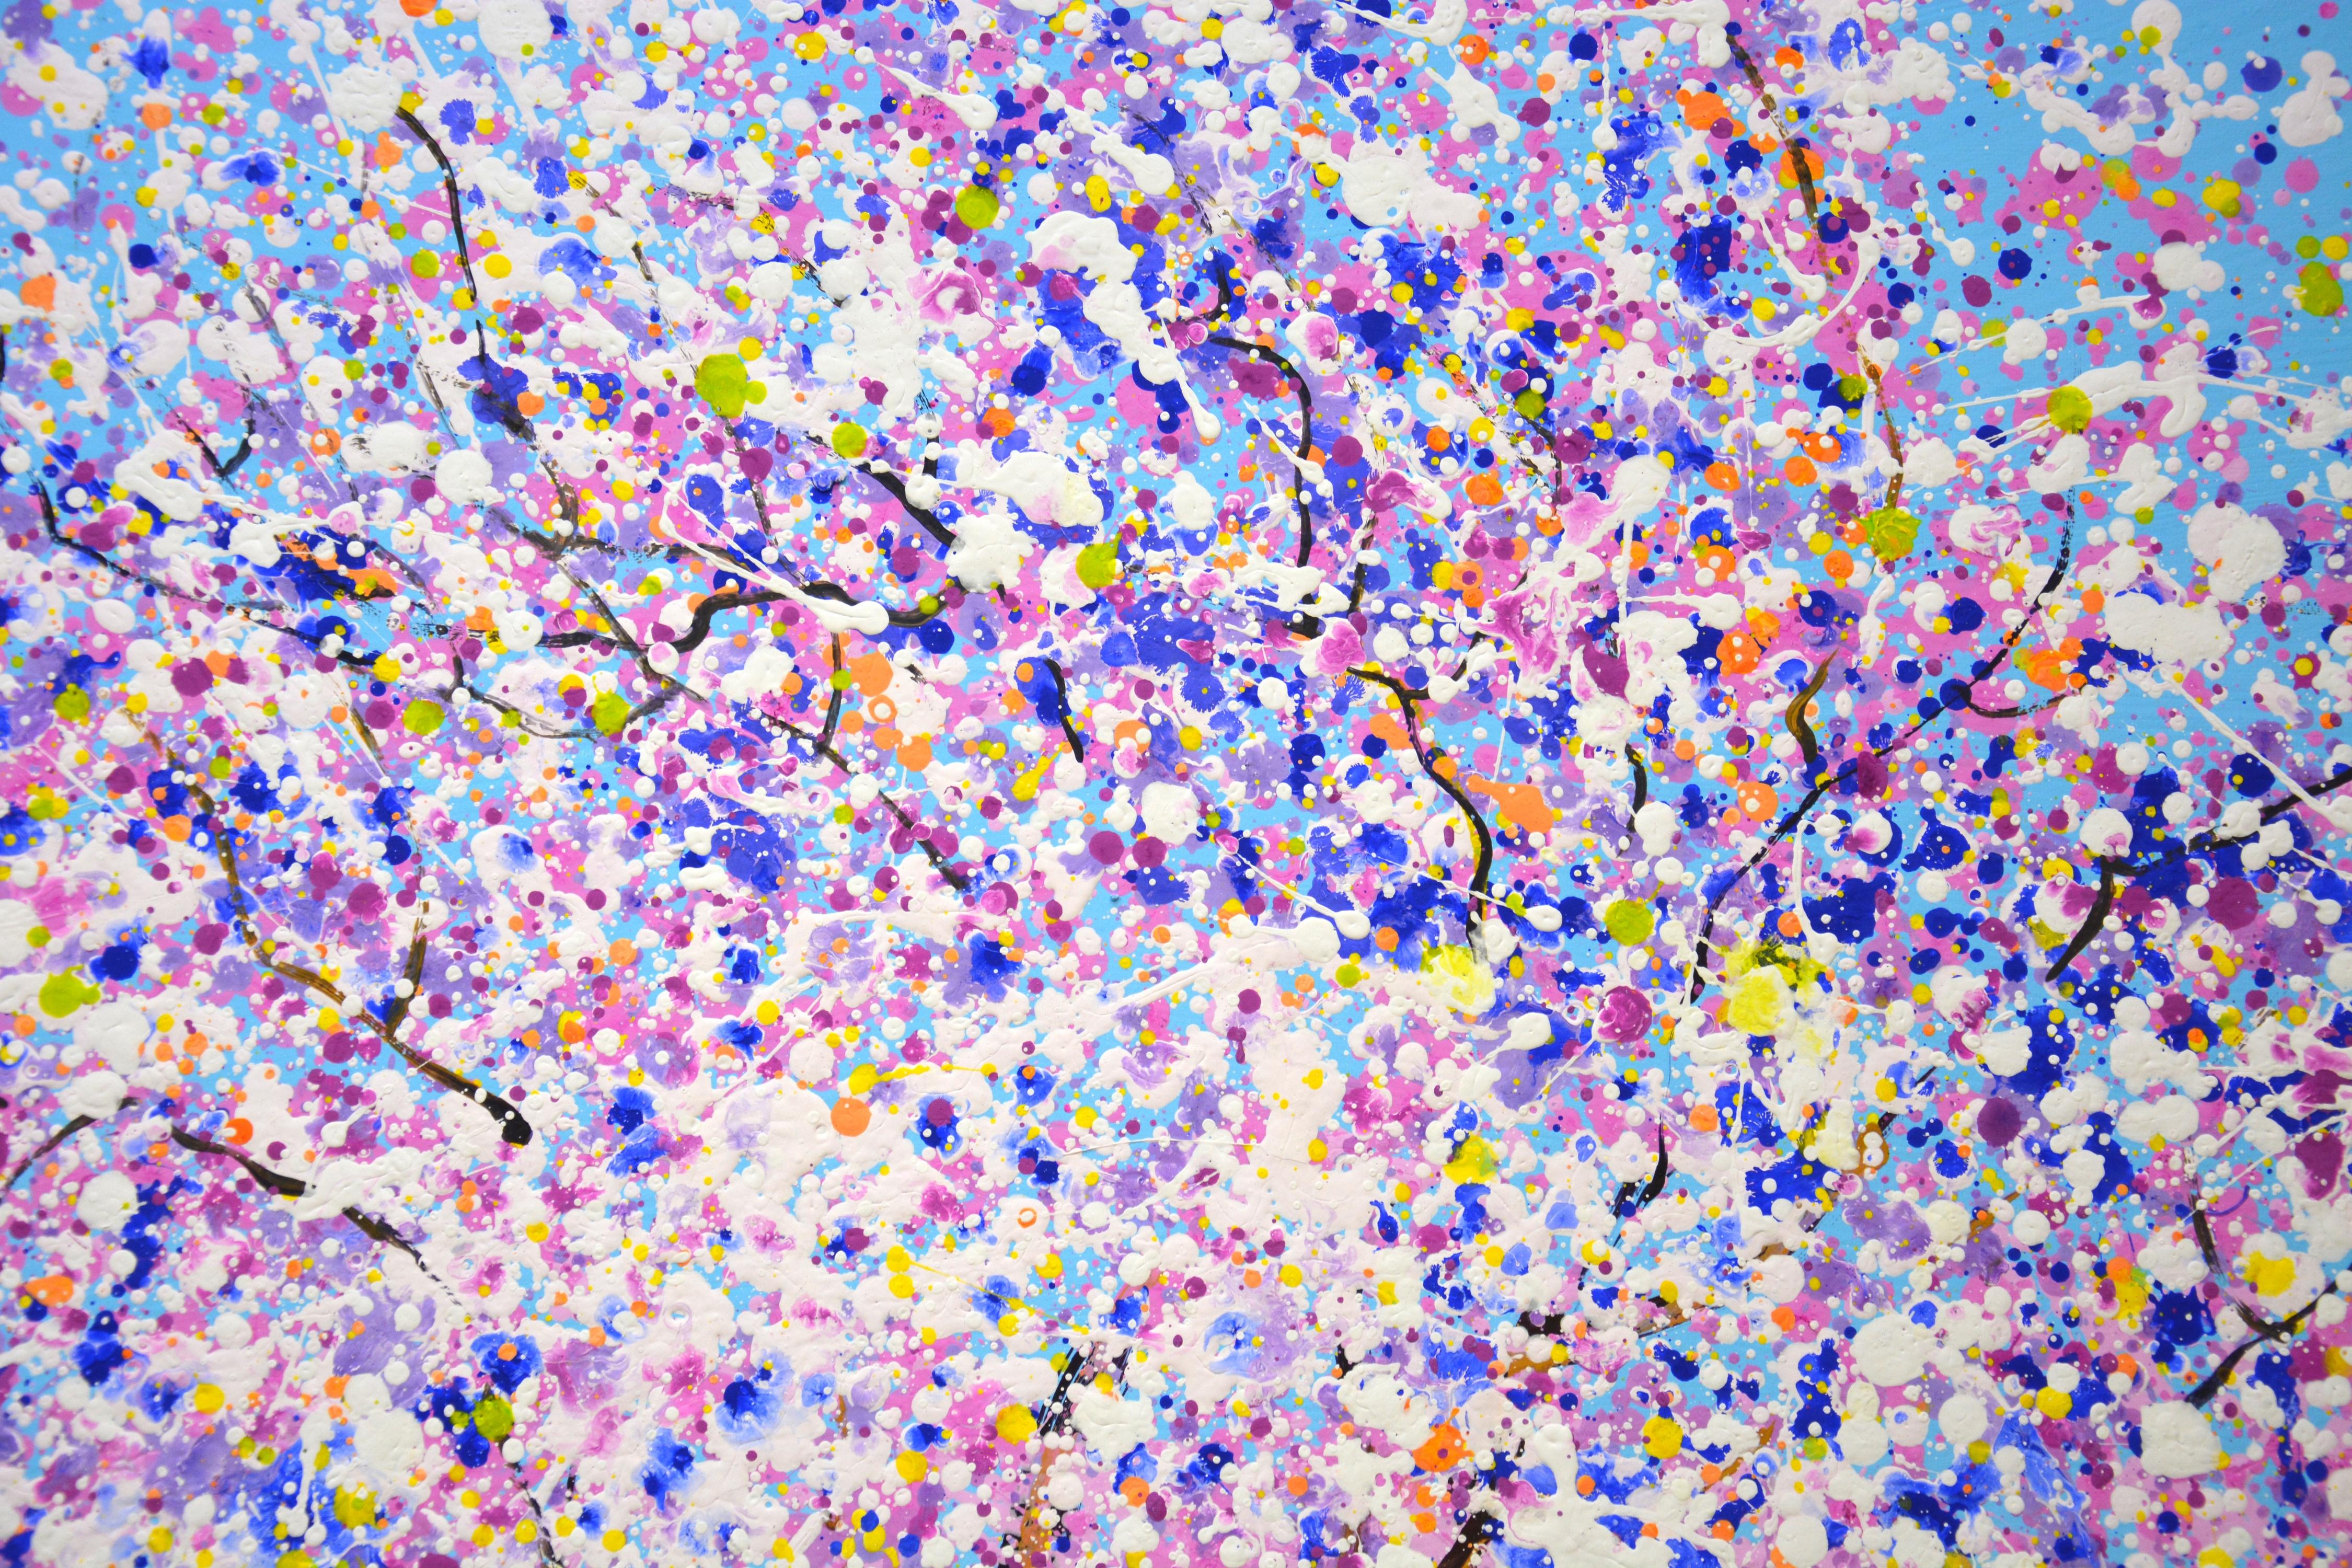 Blooming sakura 5. Japanese tree. Acrylic paints in soft pink, baby blue, baby purple, lilac, white creamy pink splattered and splattered, creating a sense of shimmer, movement, and beautiful life. Colors create an atmosphere of relaxation, harmony